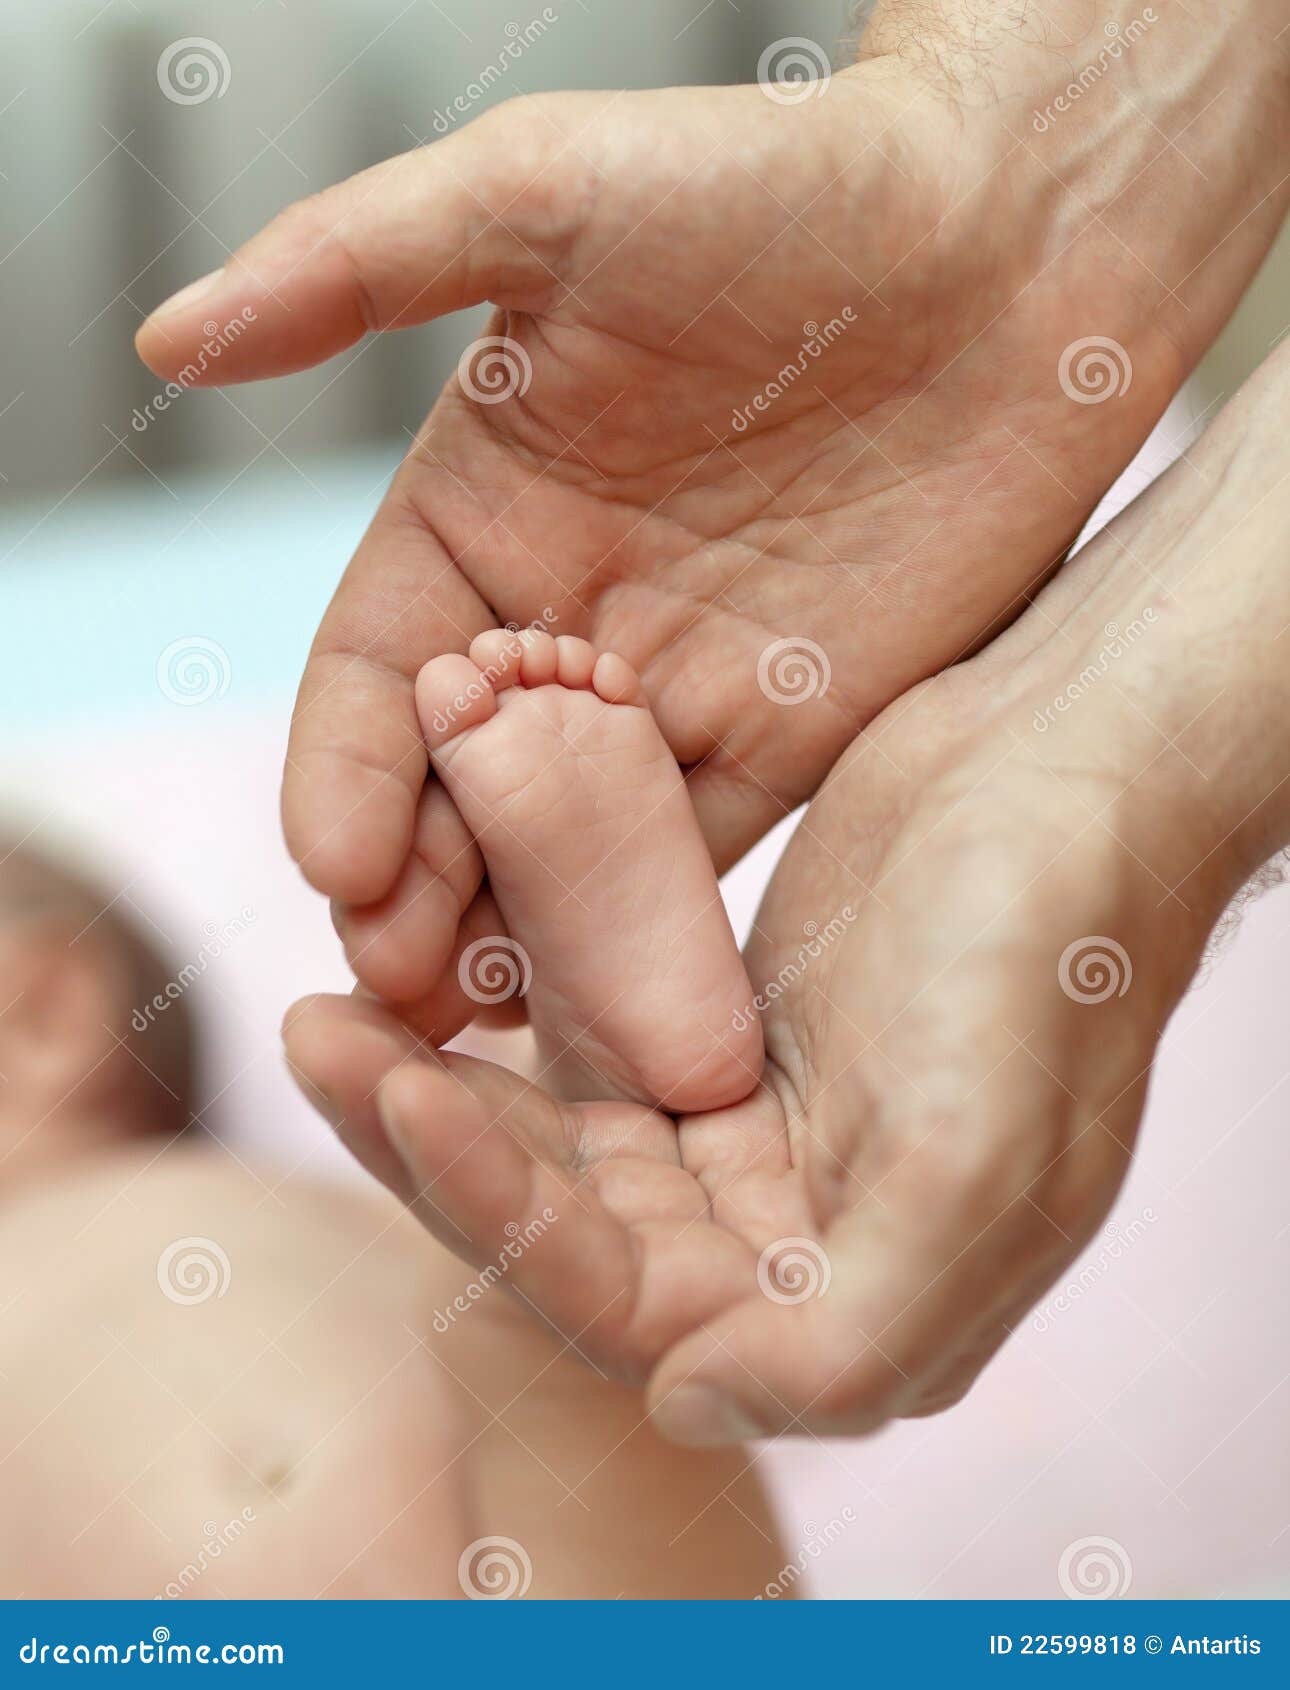 14,861 Big Hands Holding Small Hands Royalty-Free Images, Stock